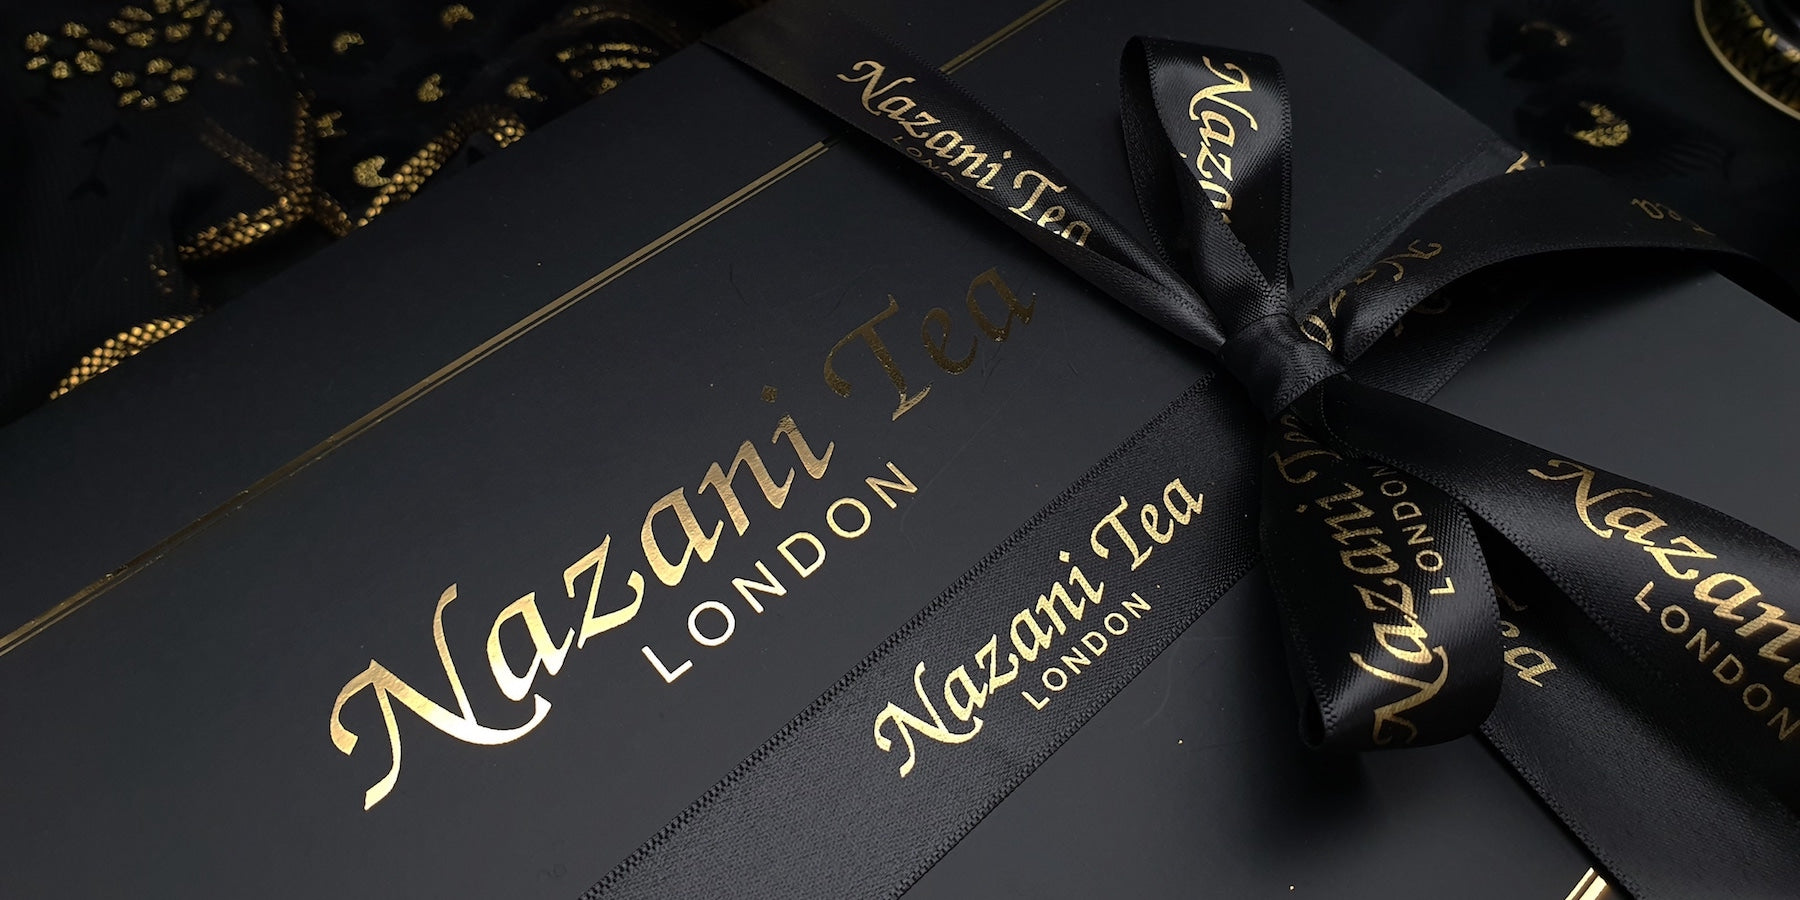 Nazani Tea; corporate gifts; tea for business; tea gifts; organic tea gifts; loose leaf tea gifts; corpo gifts